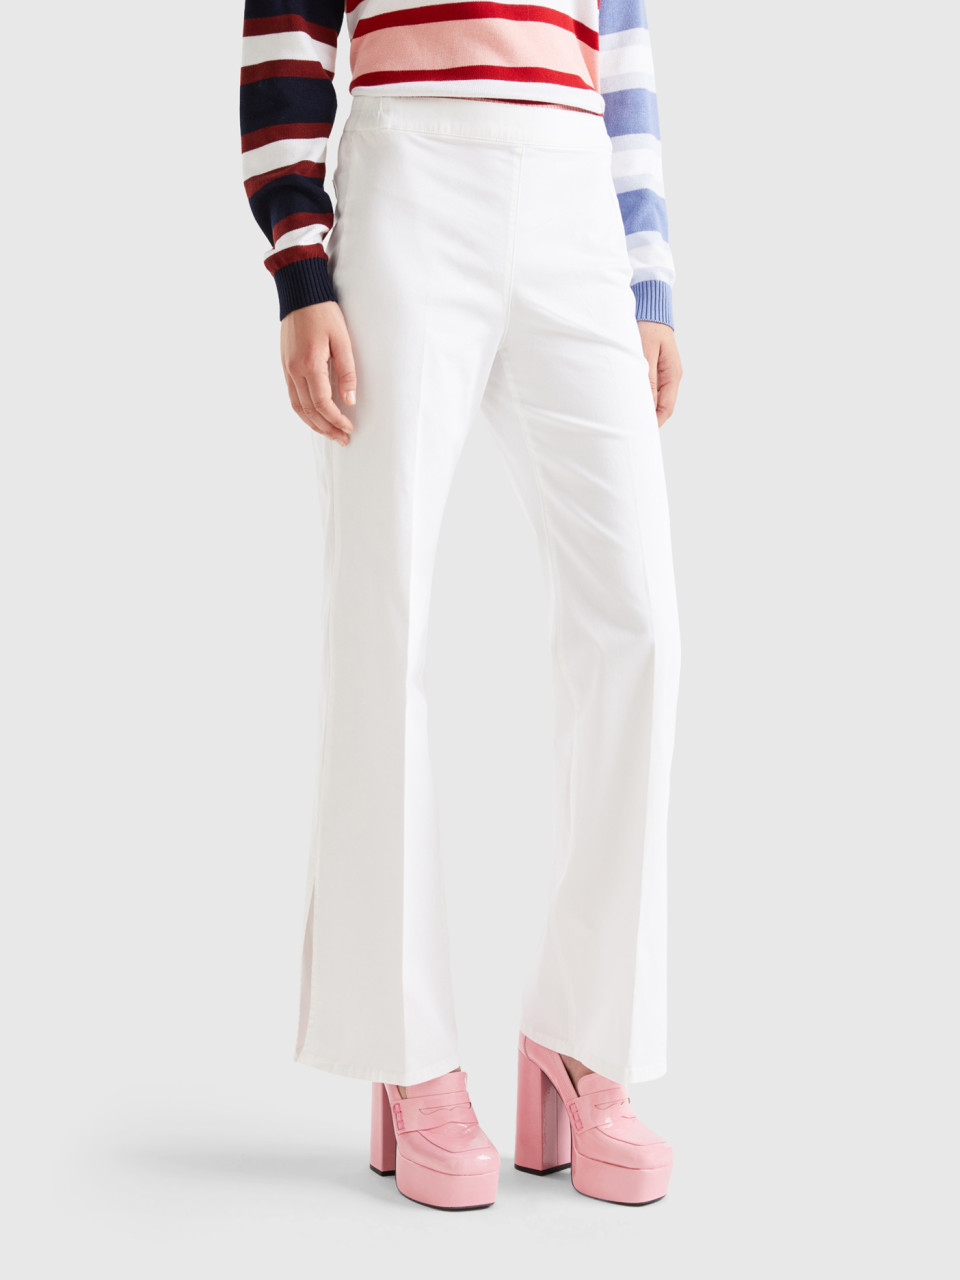 Benetton, Flared Trousers With Slits, White, Women